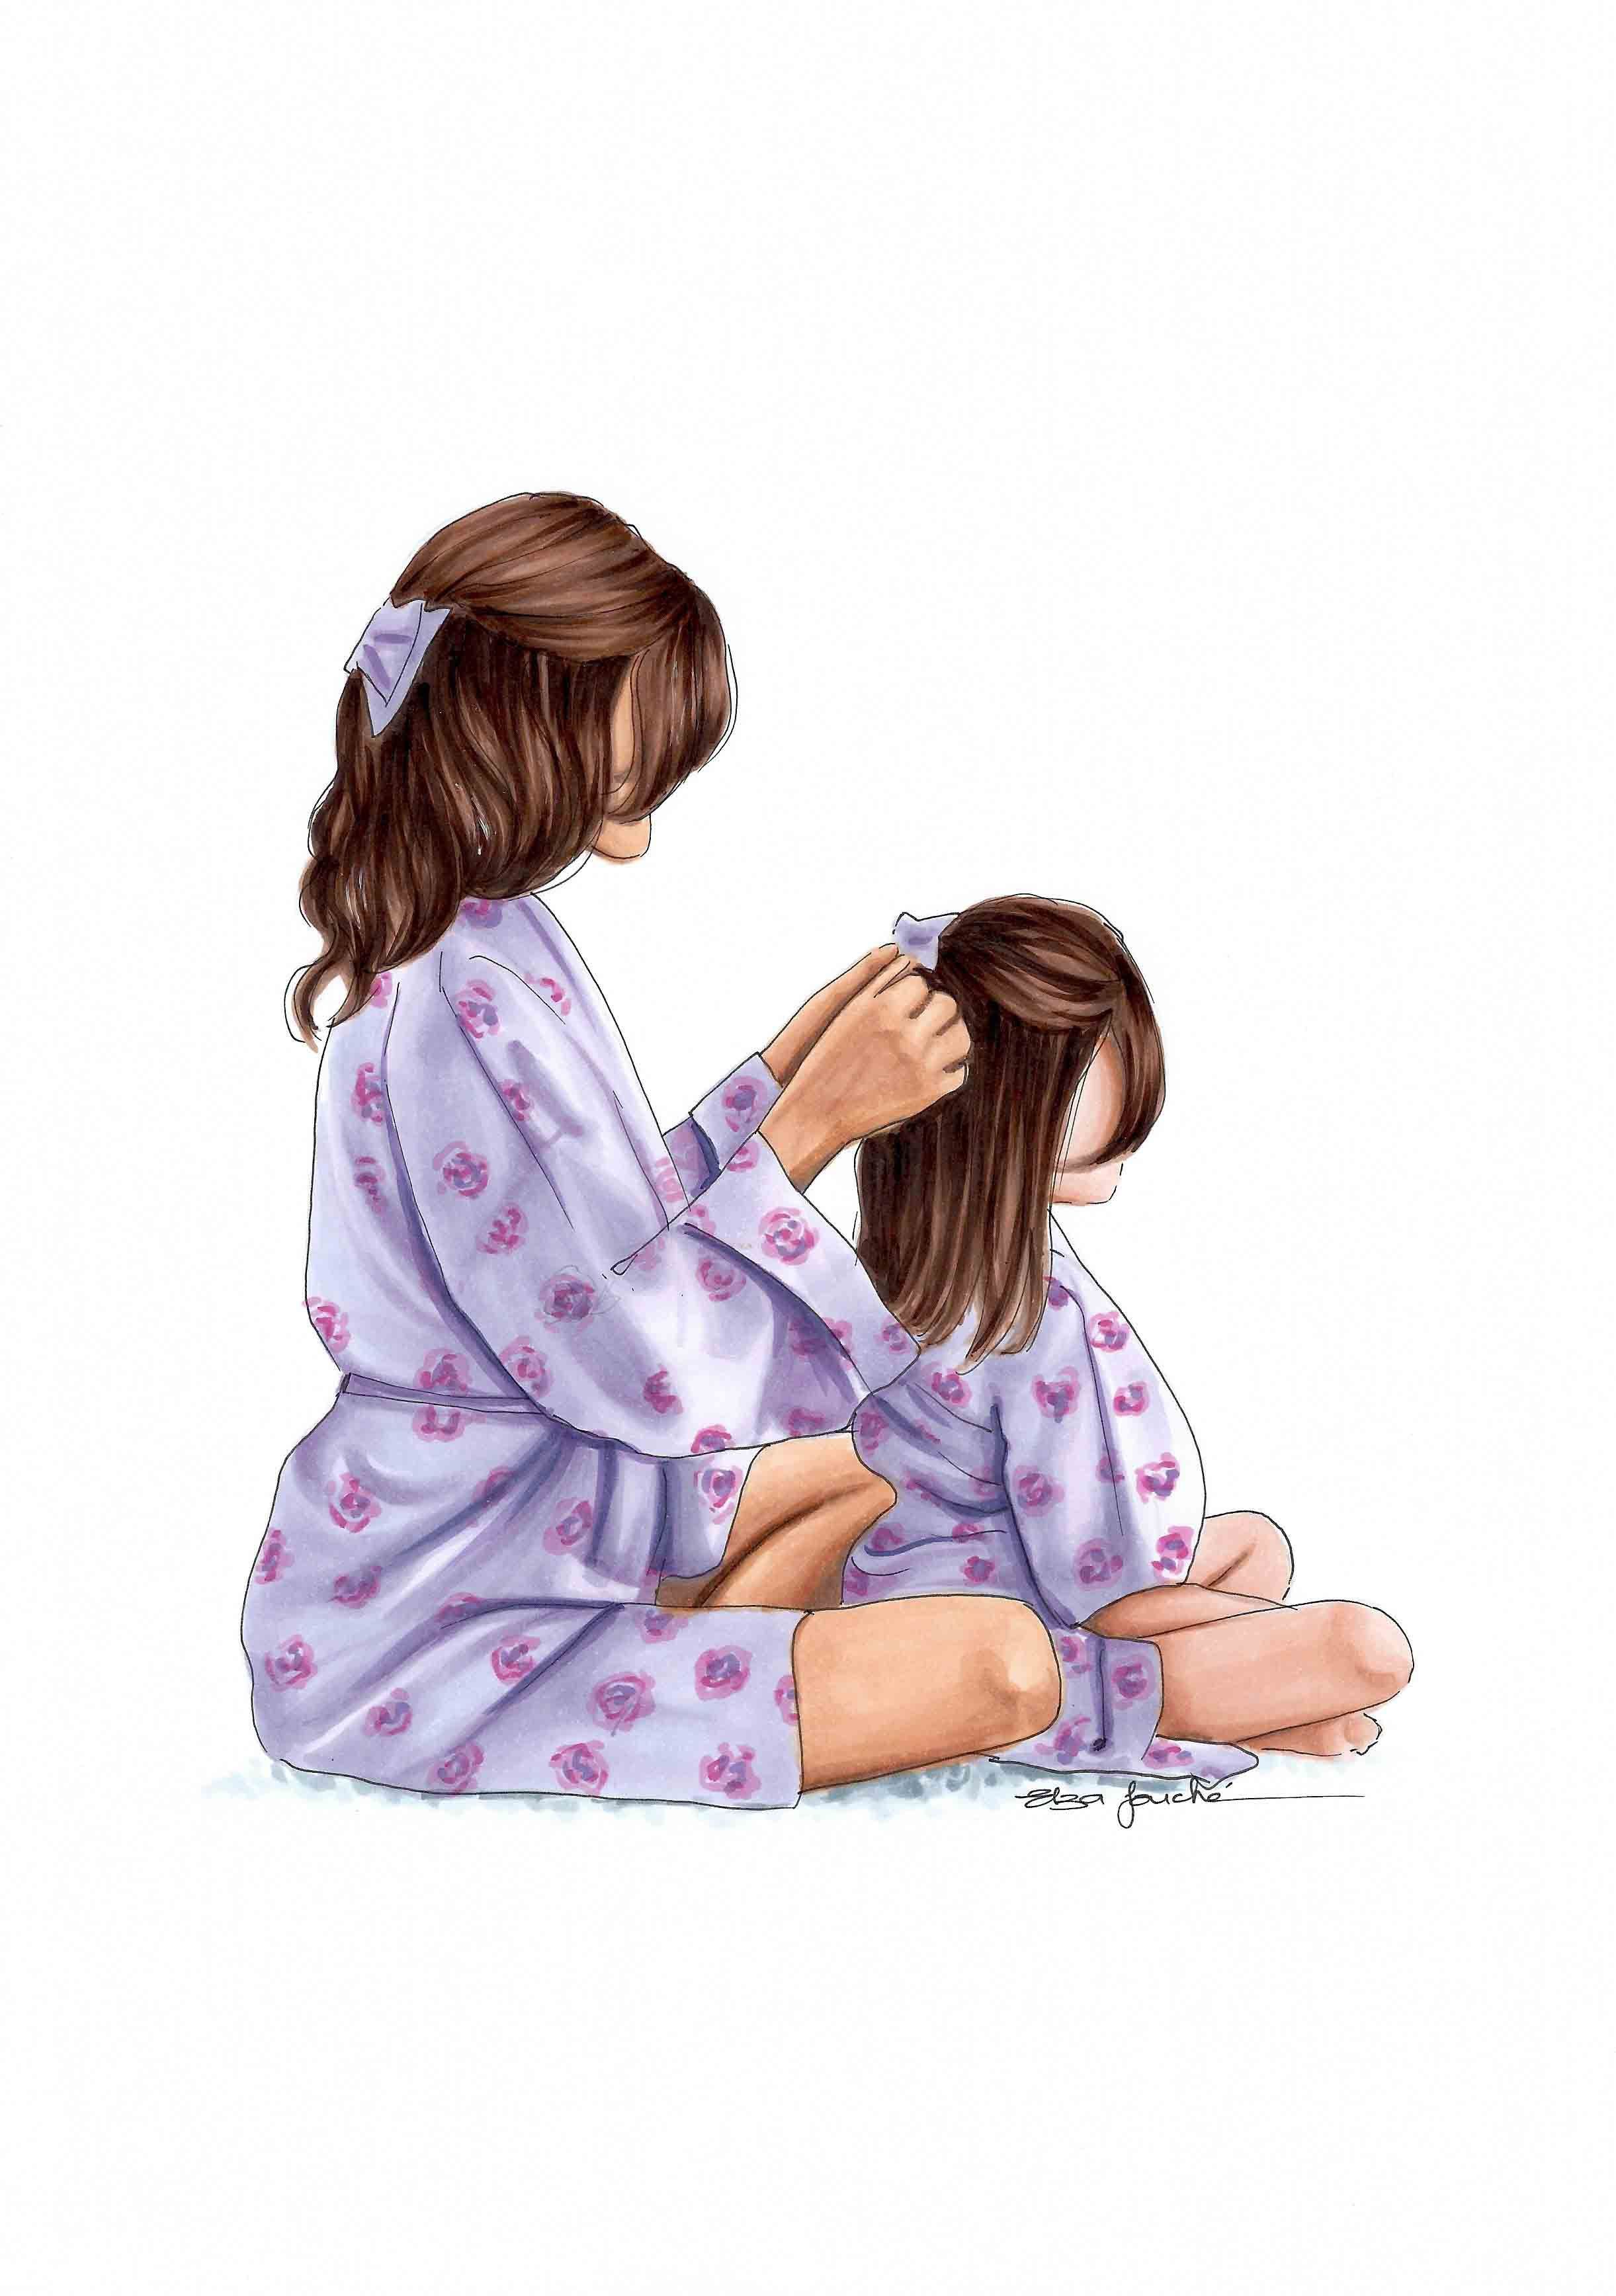 Girly Drawings for Mom